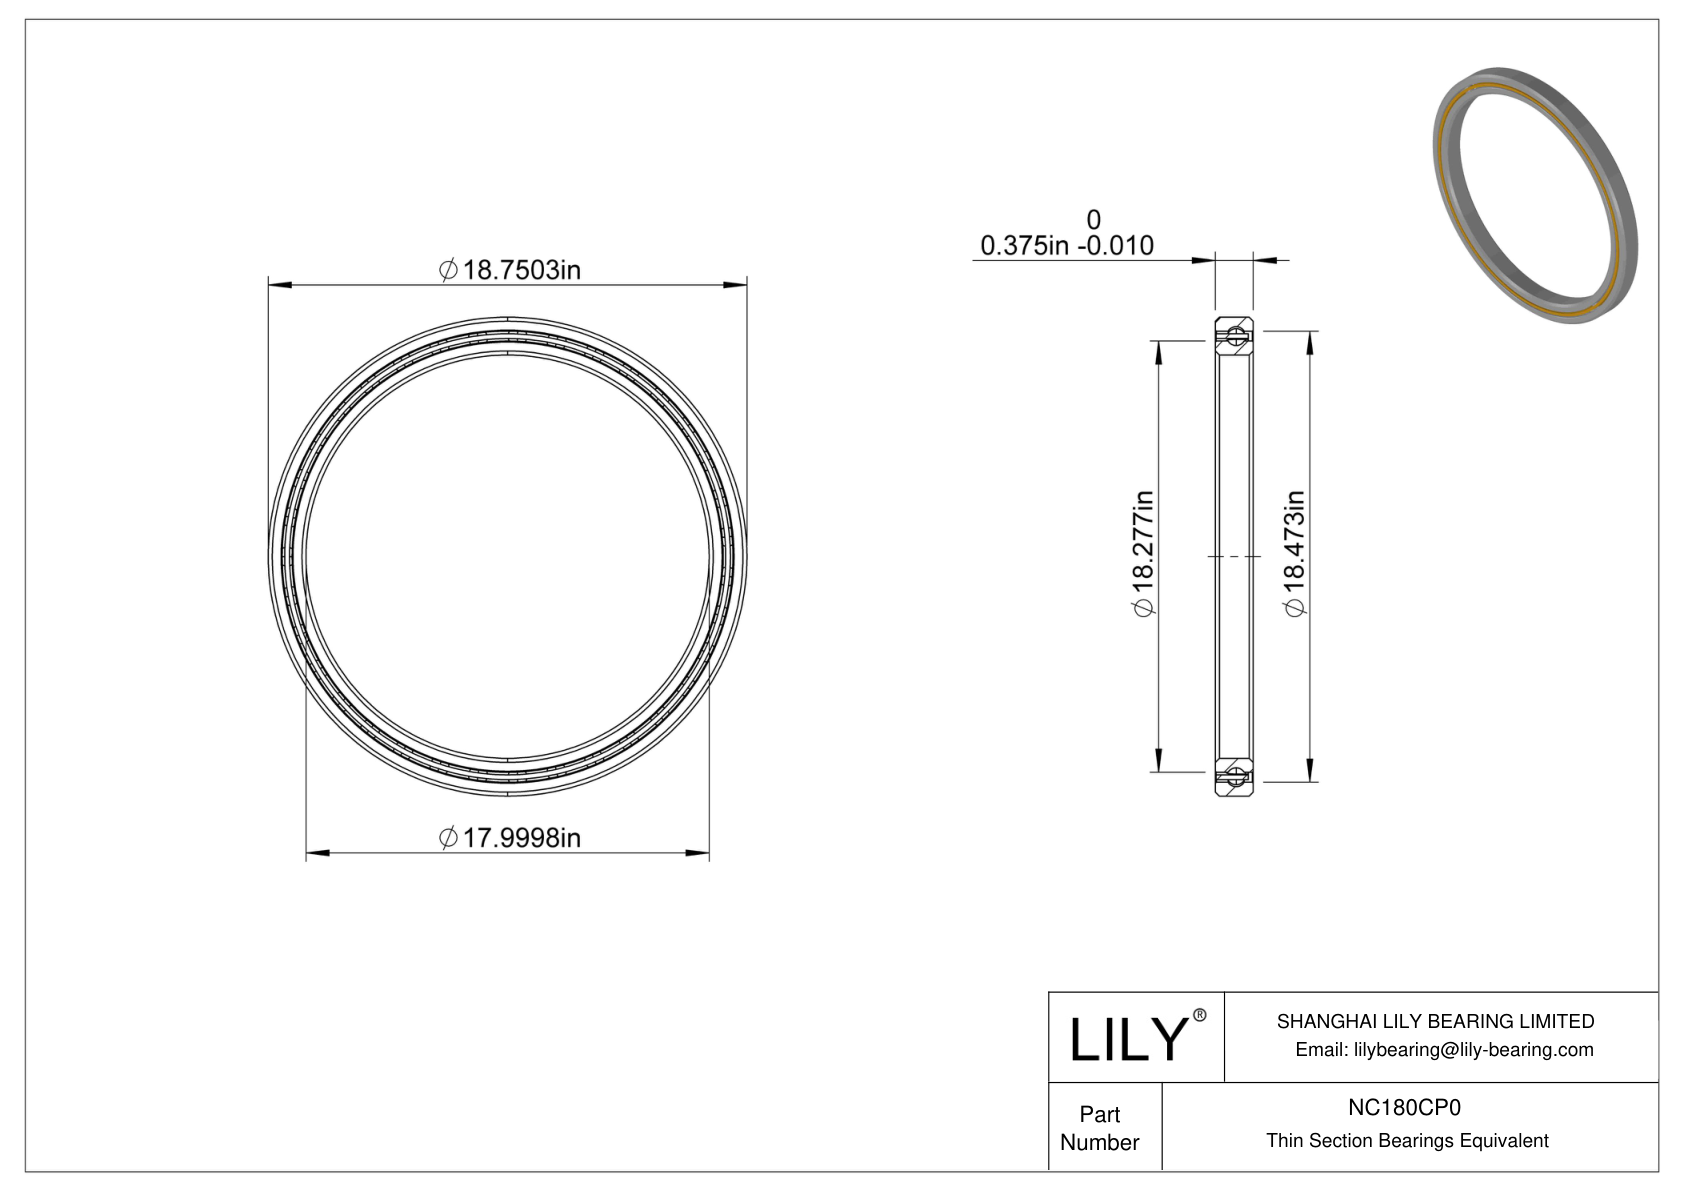 NC180CP0 Constant Section (CS) Bearings cad drawing